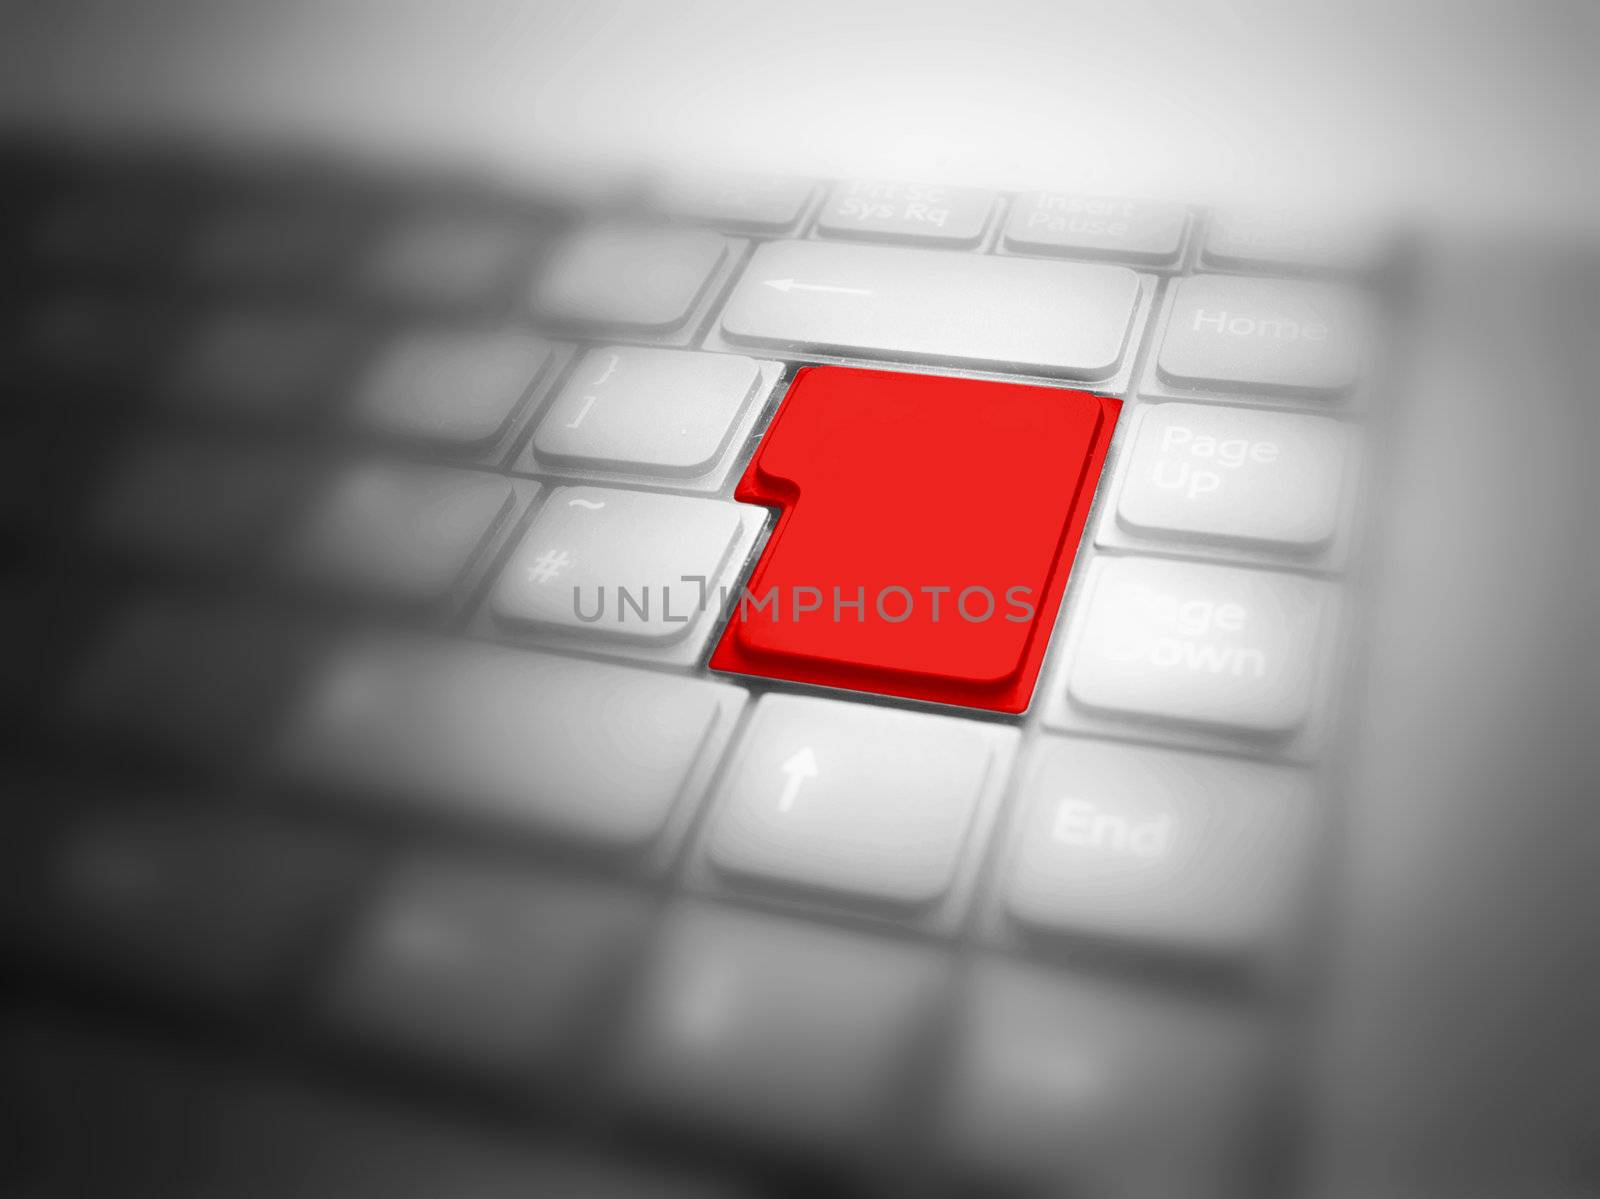 Big red button highlighted on keyboard by photocreo